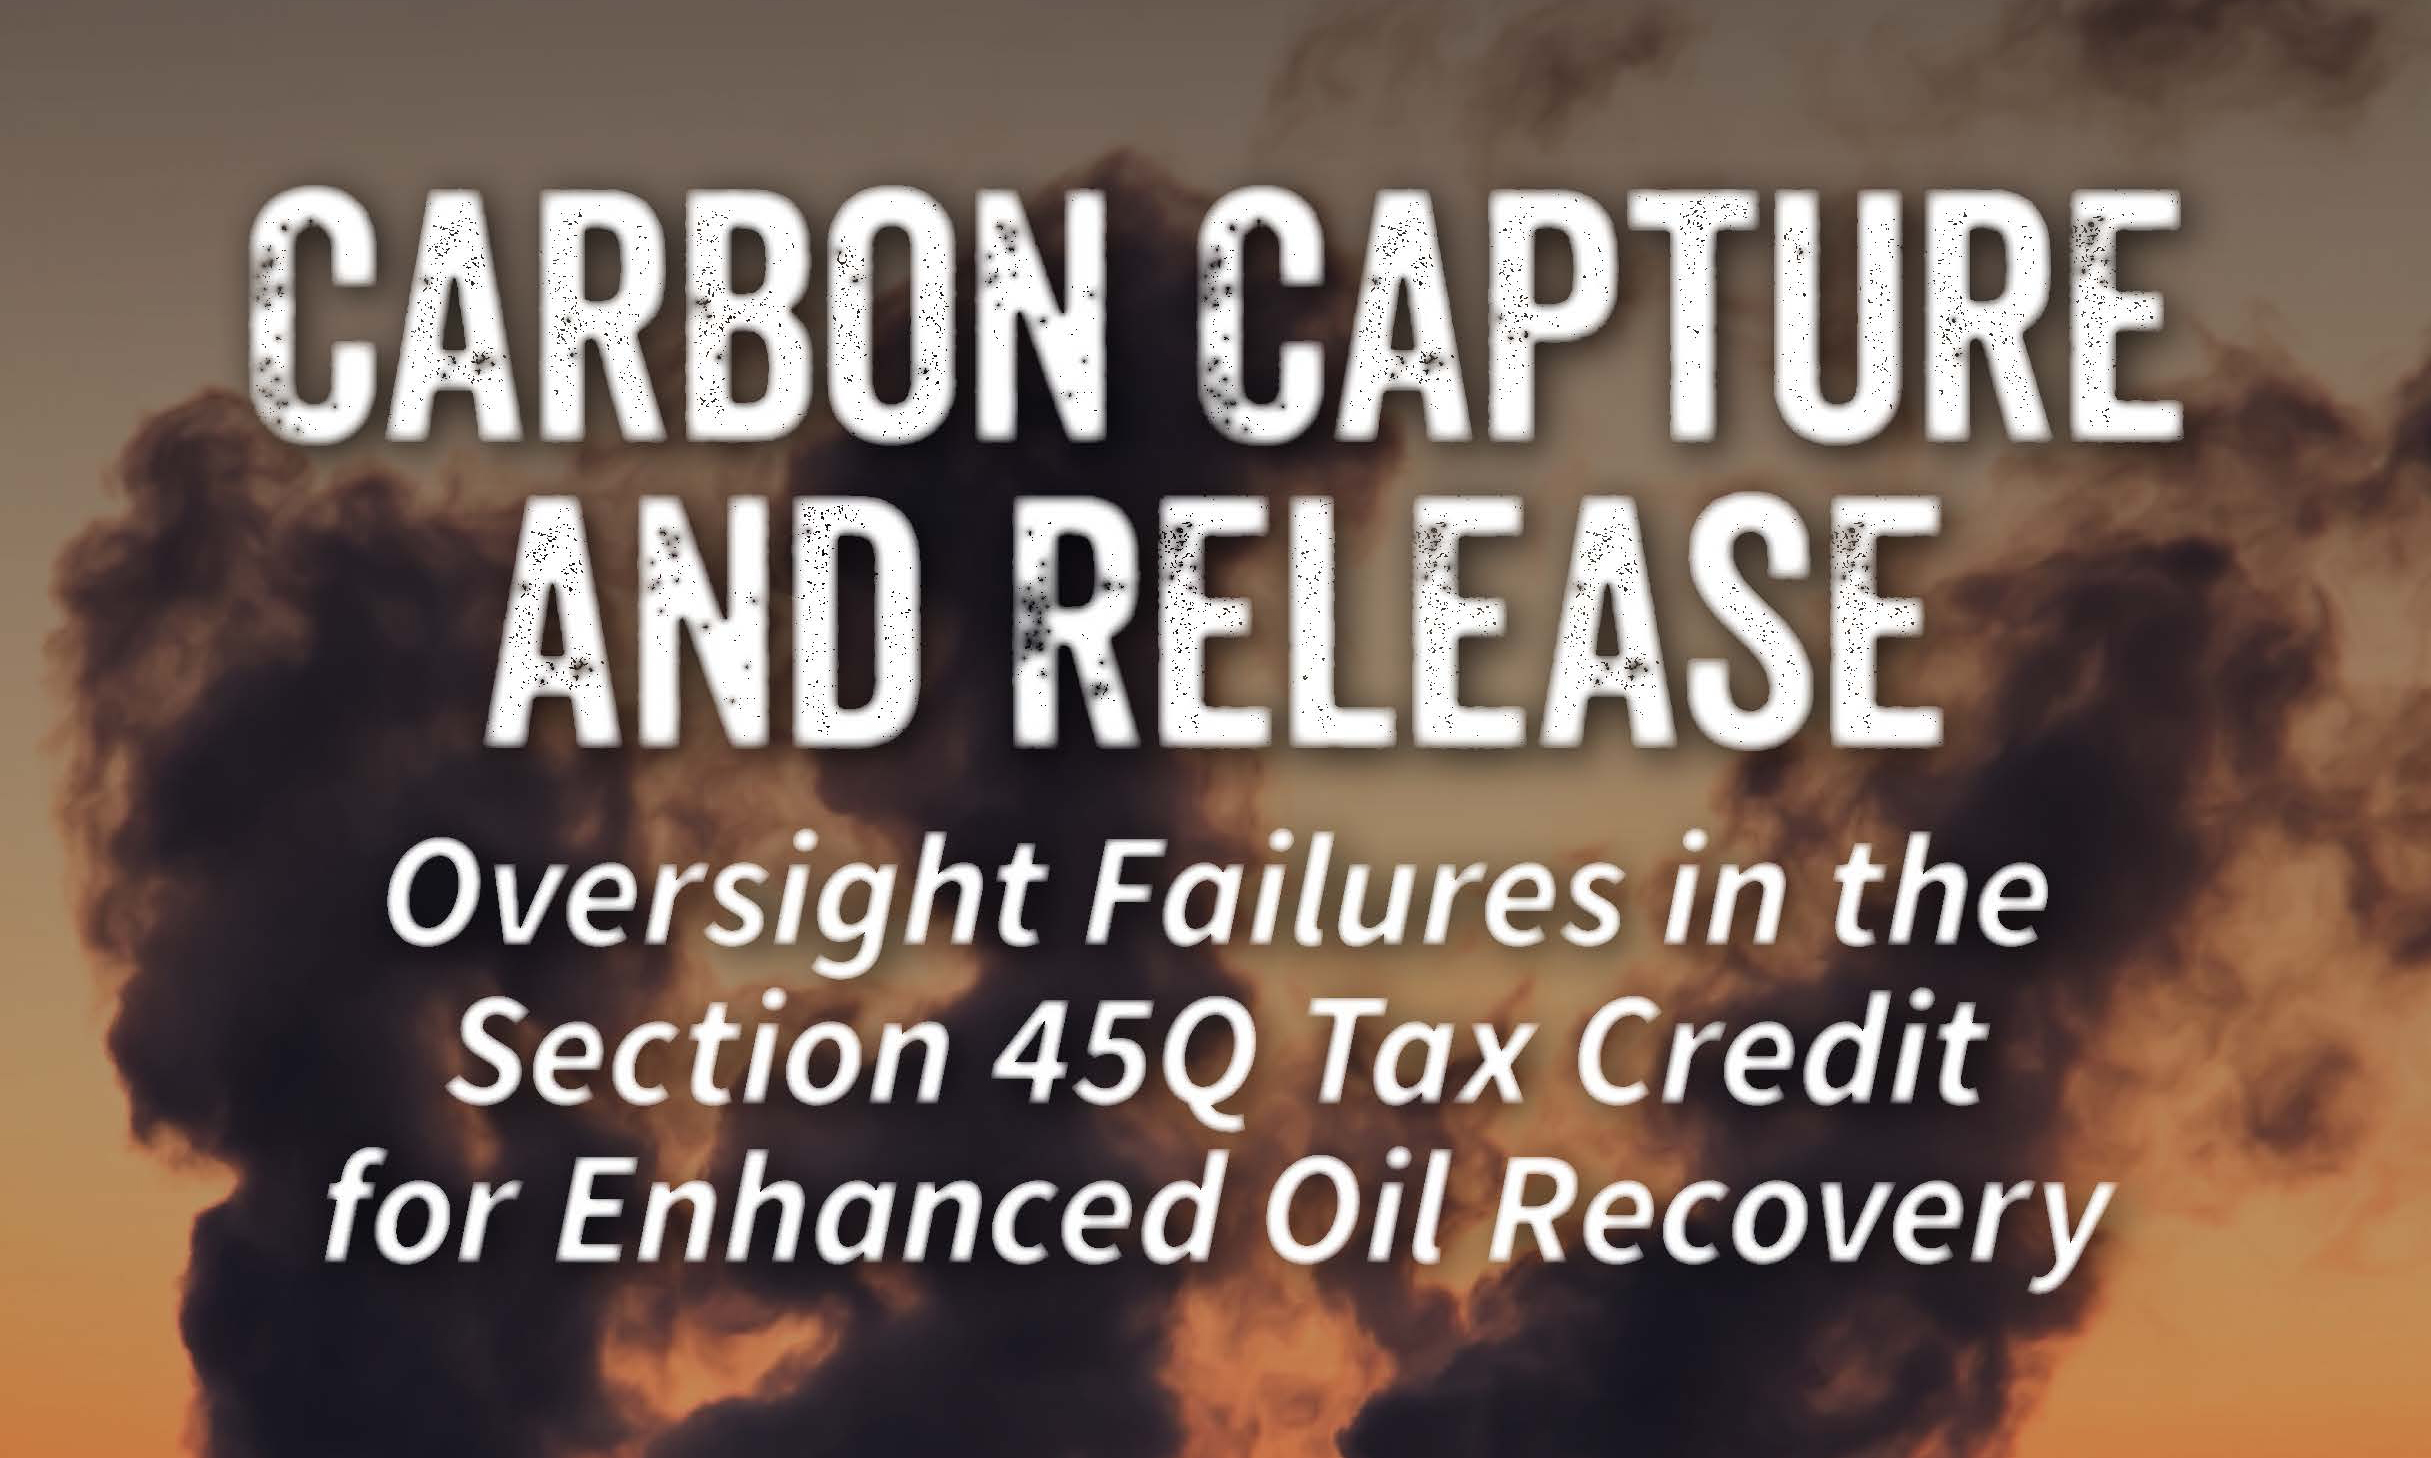 Carbon Capture and Release cover image